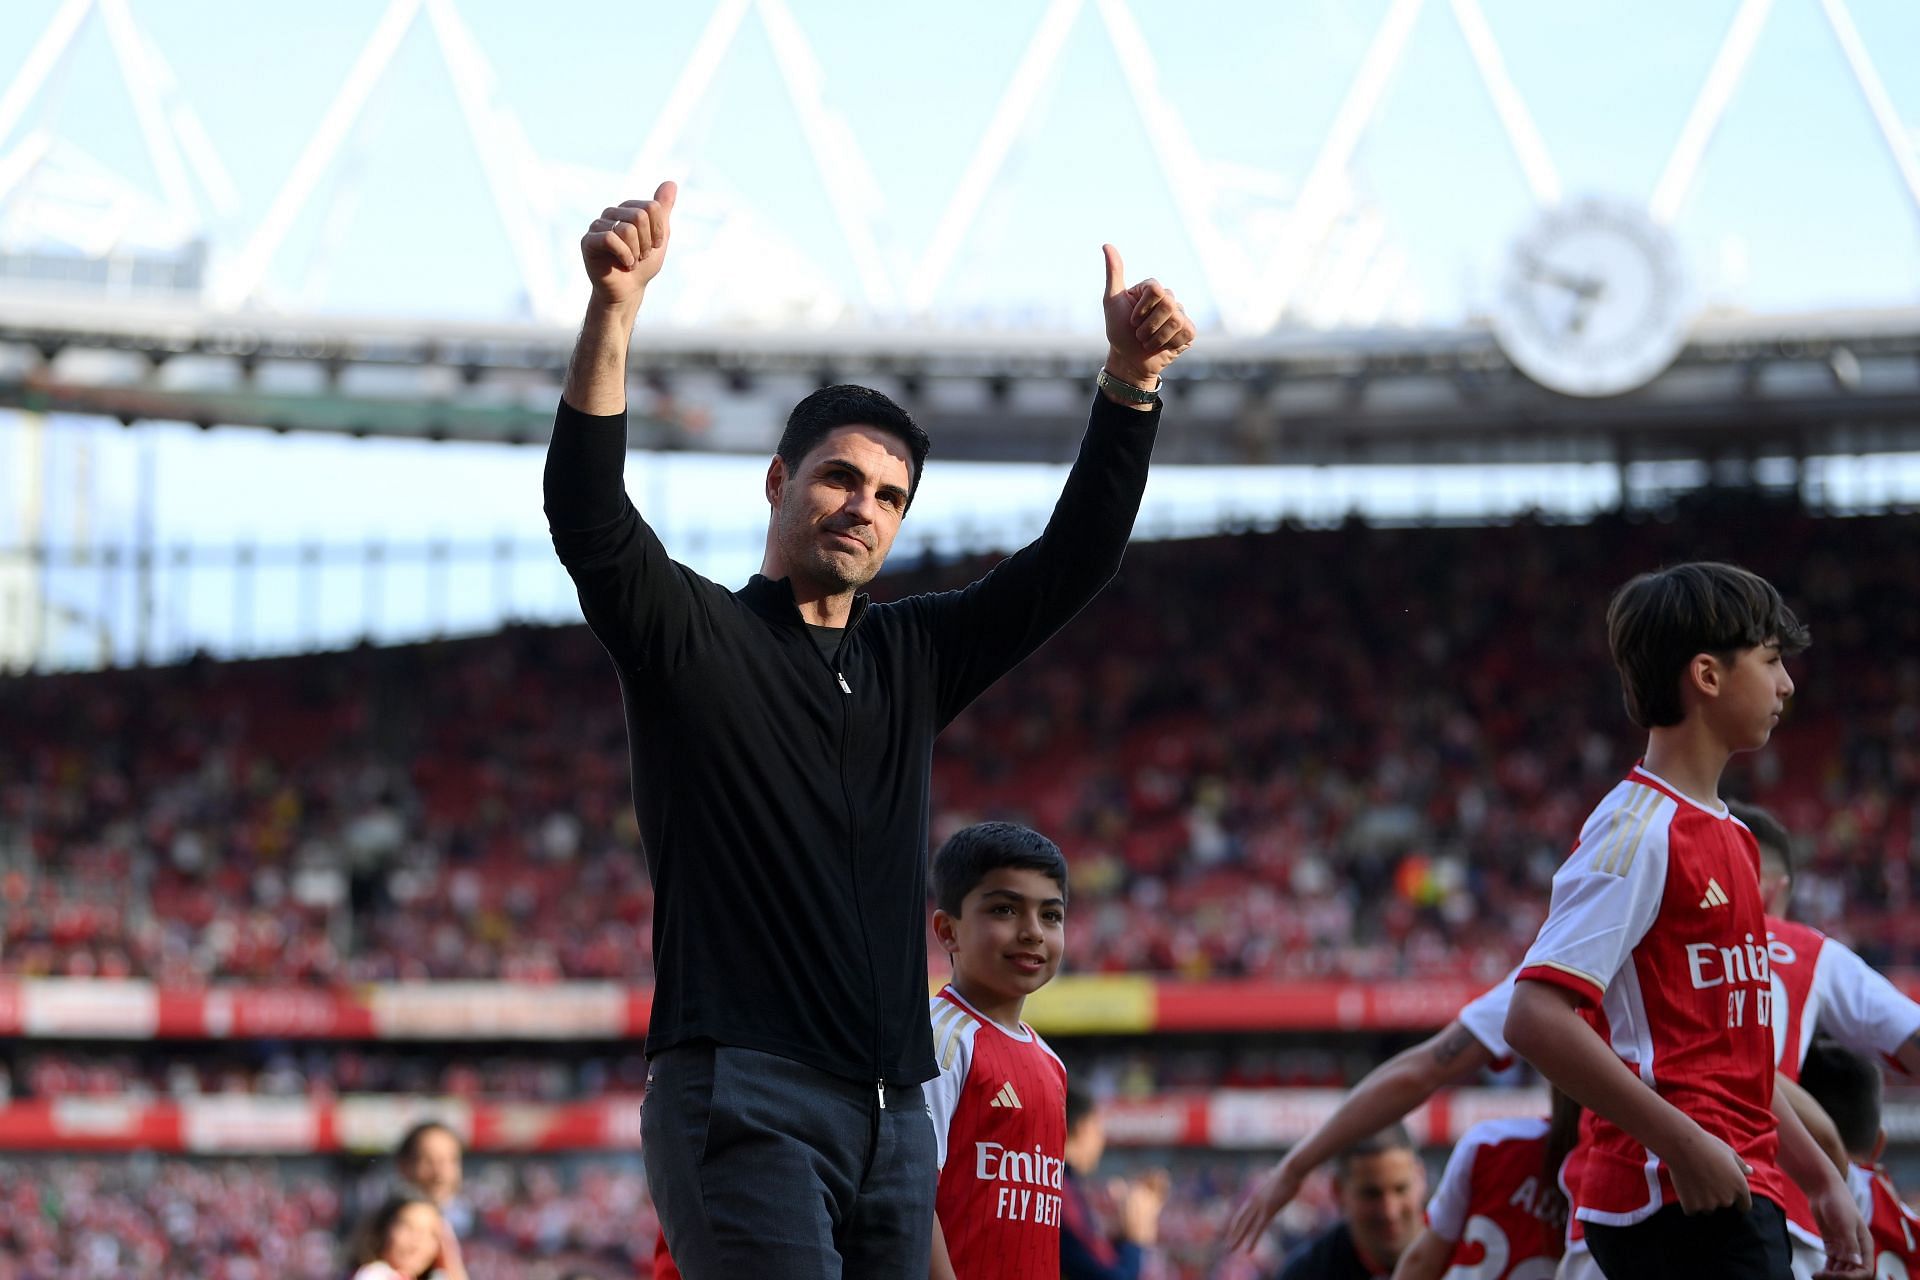 Mikel Arteta is happy he chose to join the Gunners.